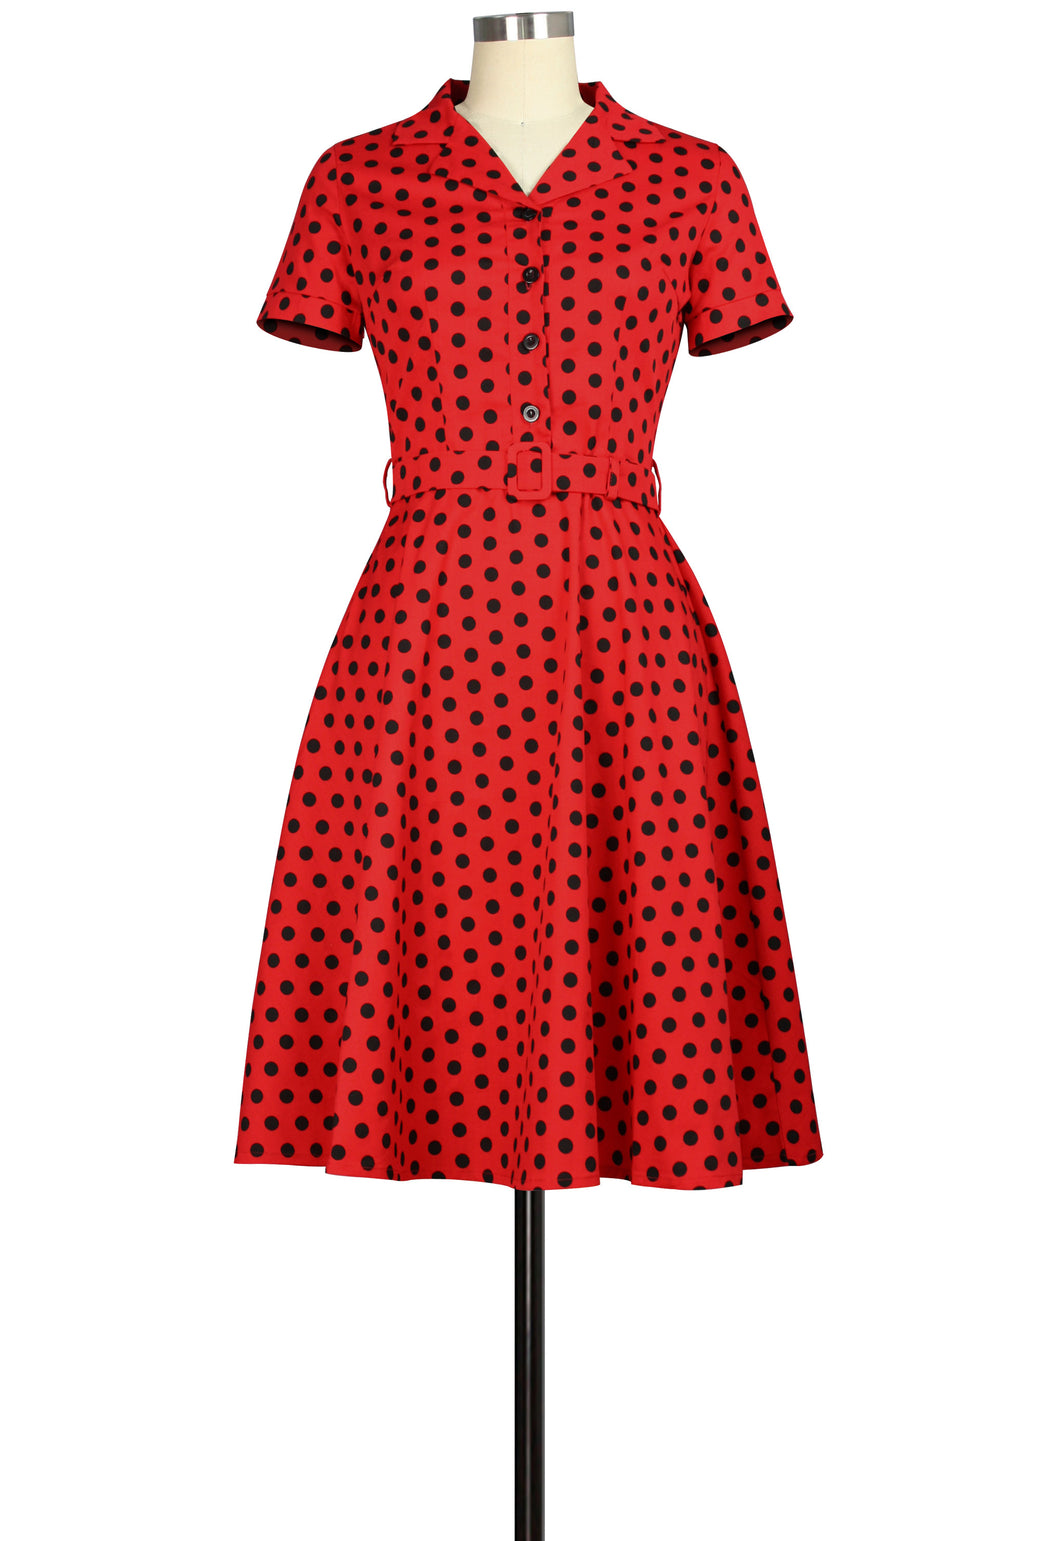 Red with Black Polka Dots Collared Dress- Size Large LAST ONE!